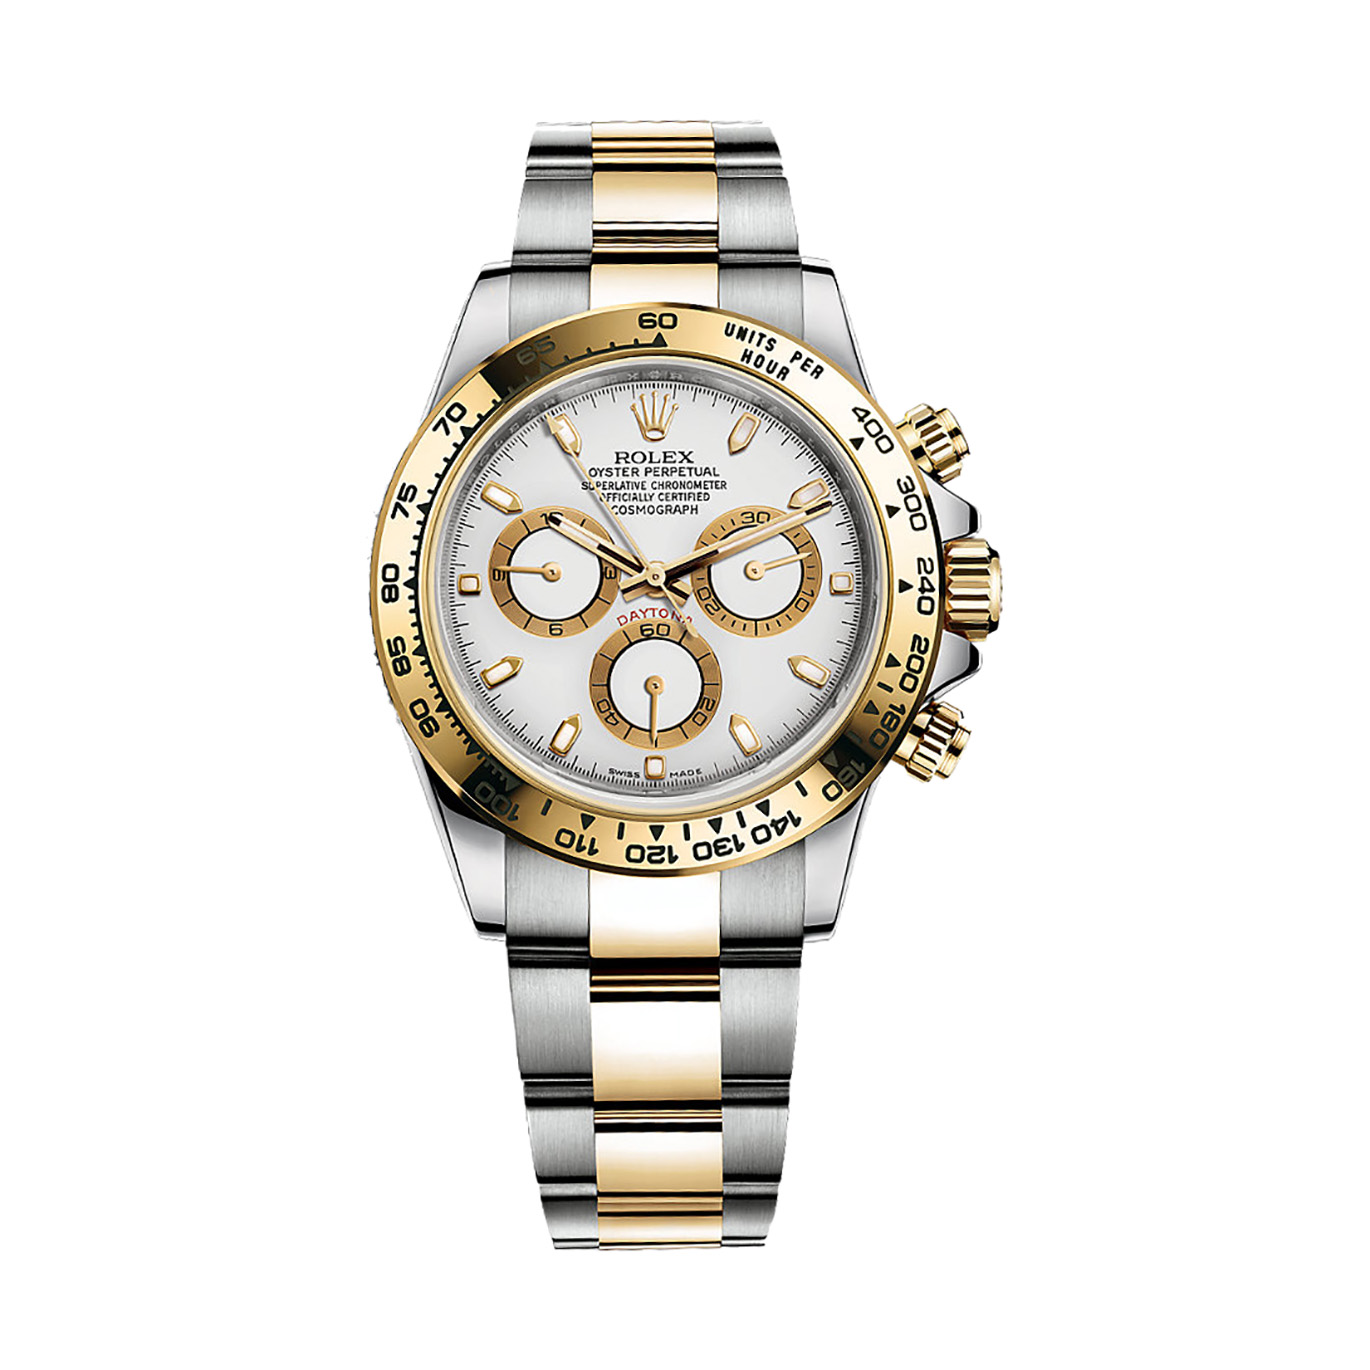 Cosmograph Daytona 116503 Gold & Stainless Steel Watch (White)